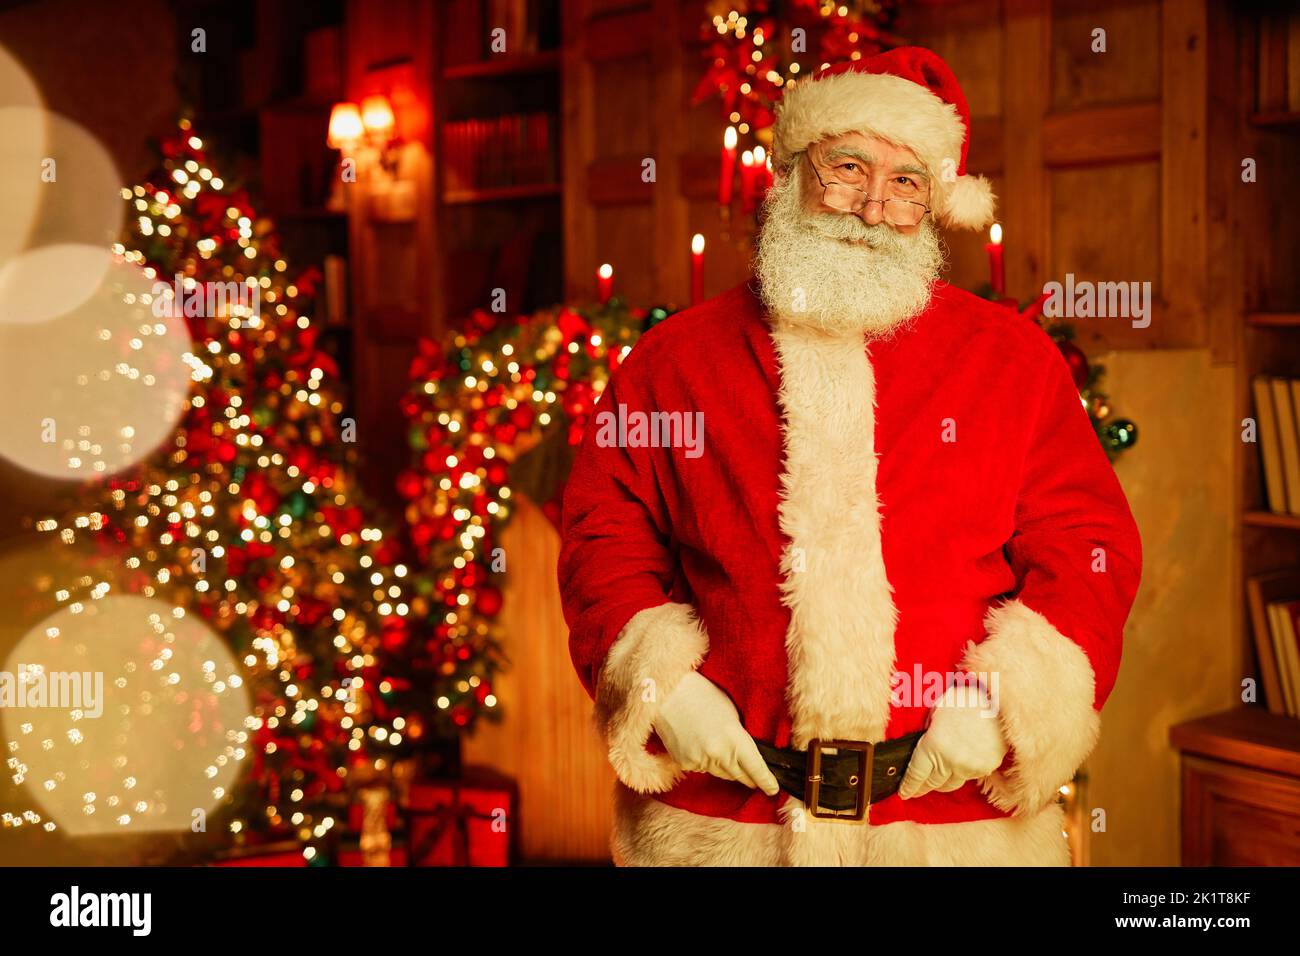 Waist up portrait of traditional Santa Claus looking at camera while standing in room with Christmas tree and twinkling lights, copy space Stock Photo